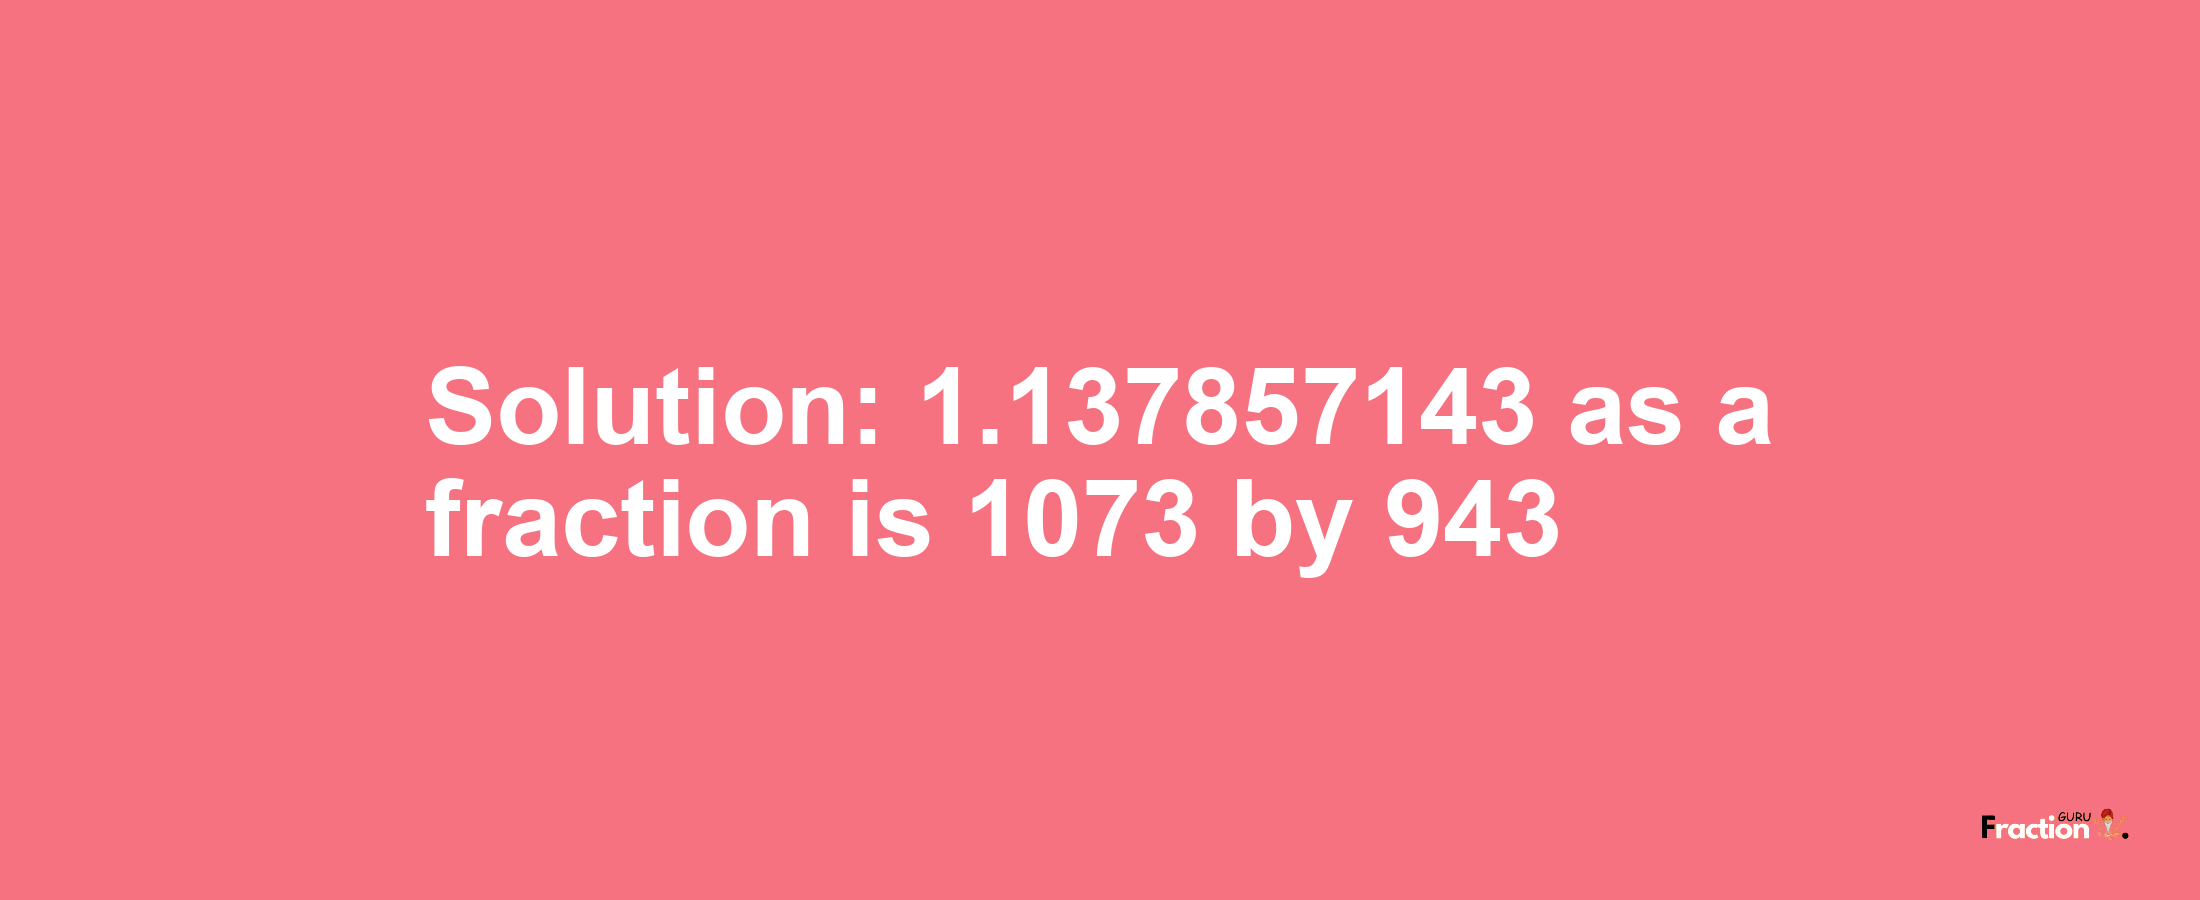 Solution:1.137857143 as a fraction is 1073/943